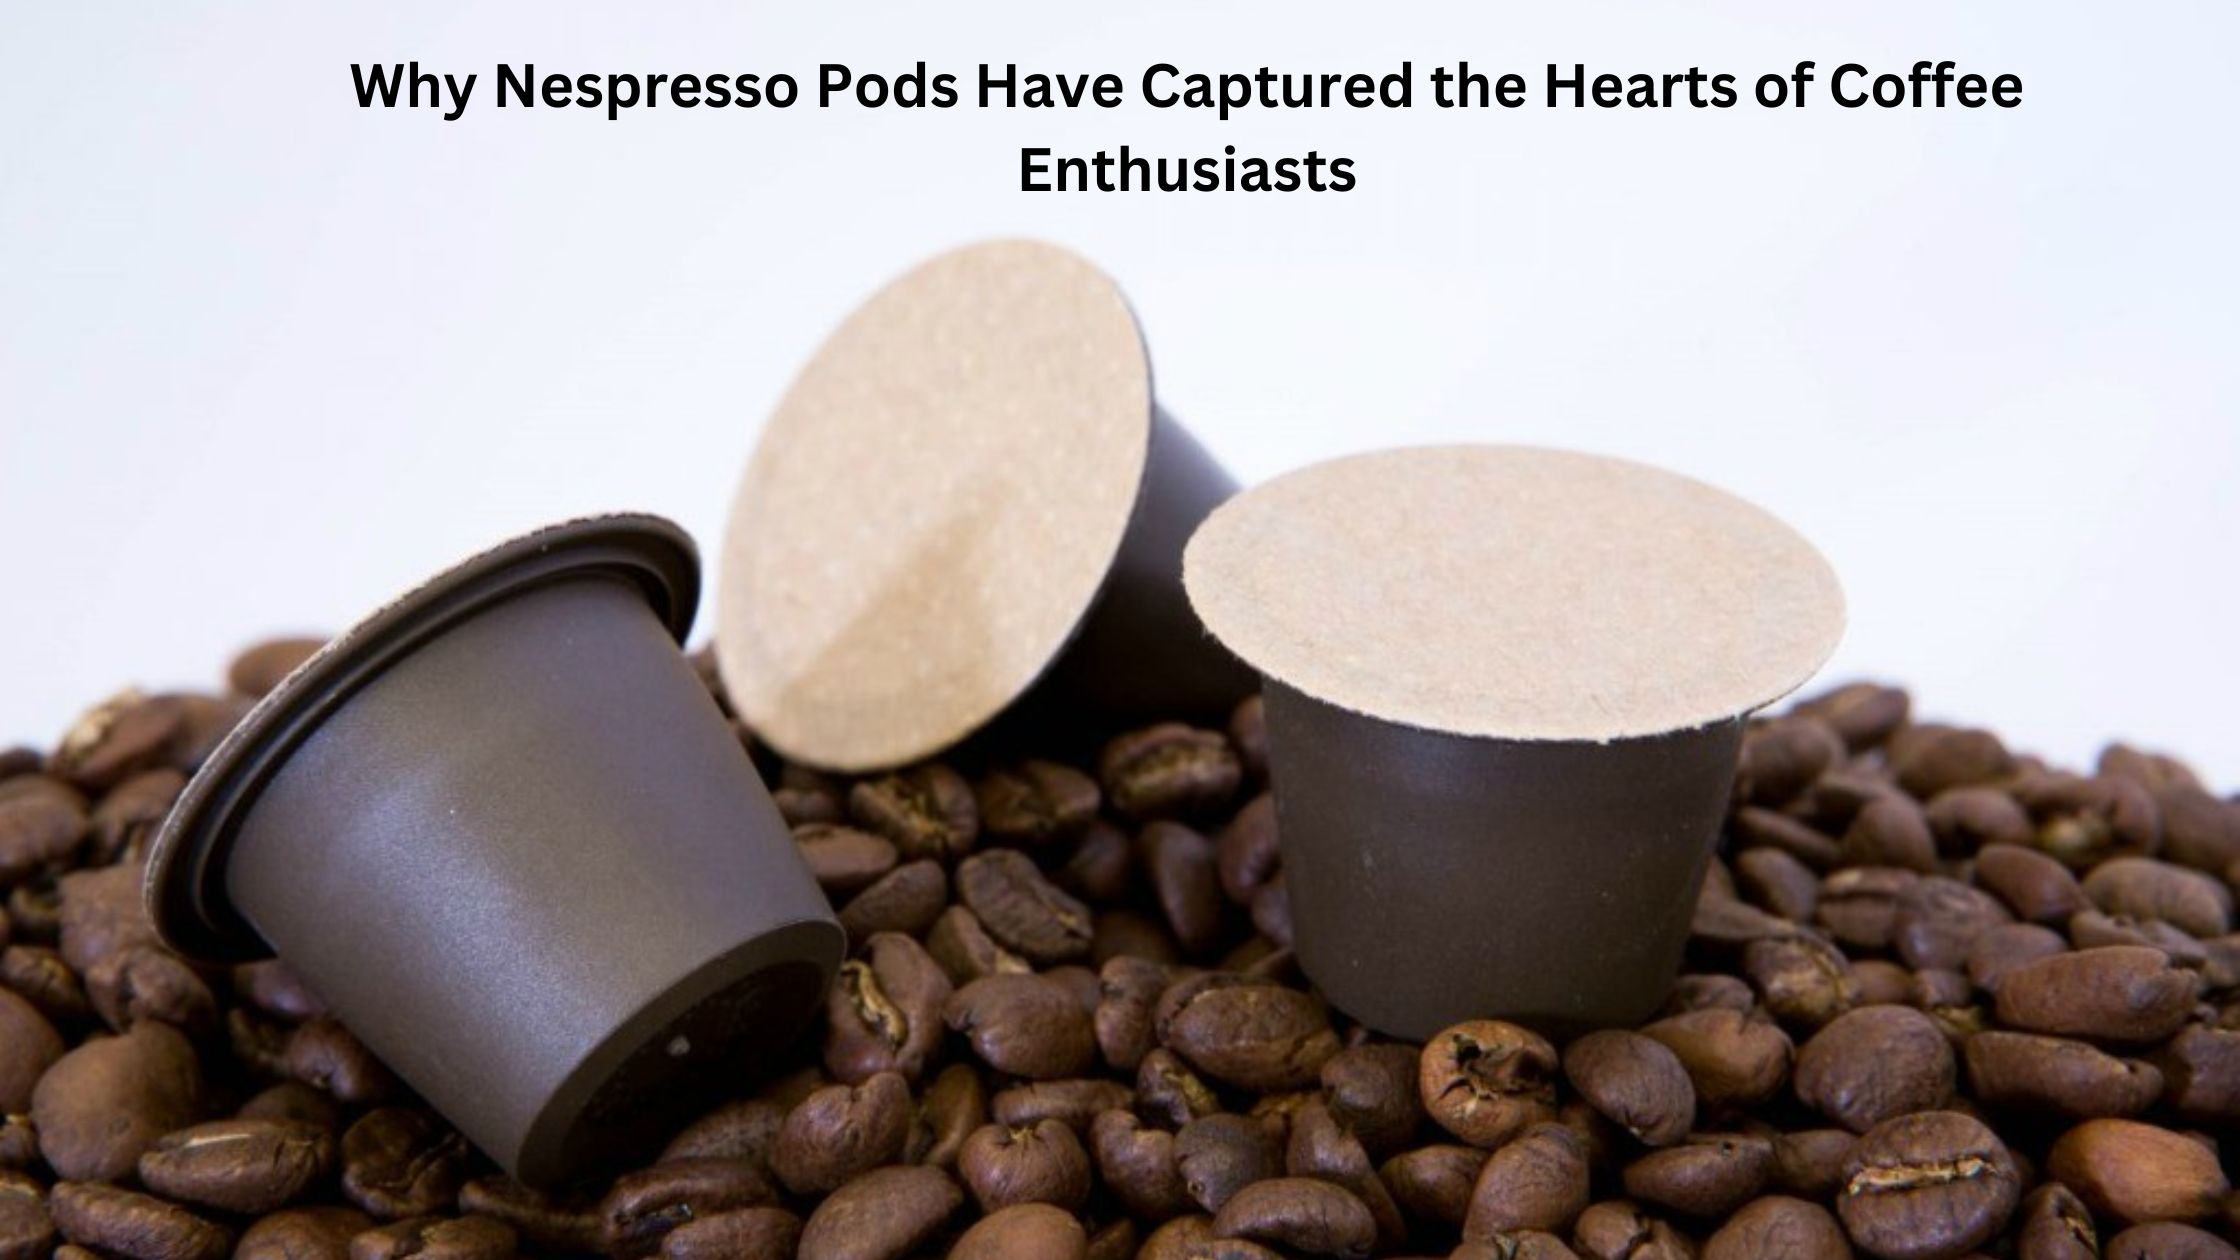 Why Nespresso Pods Have Captured the Hearts of Coffee Enthusiasts